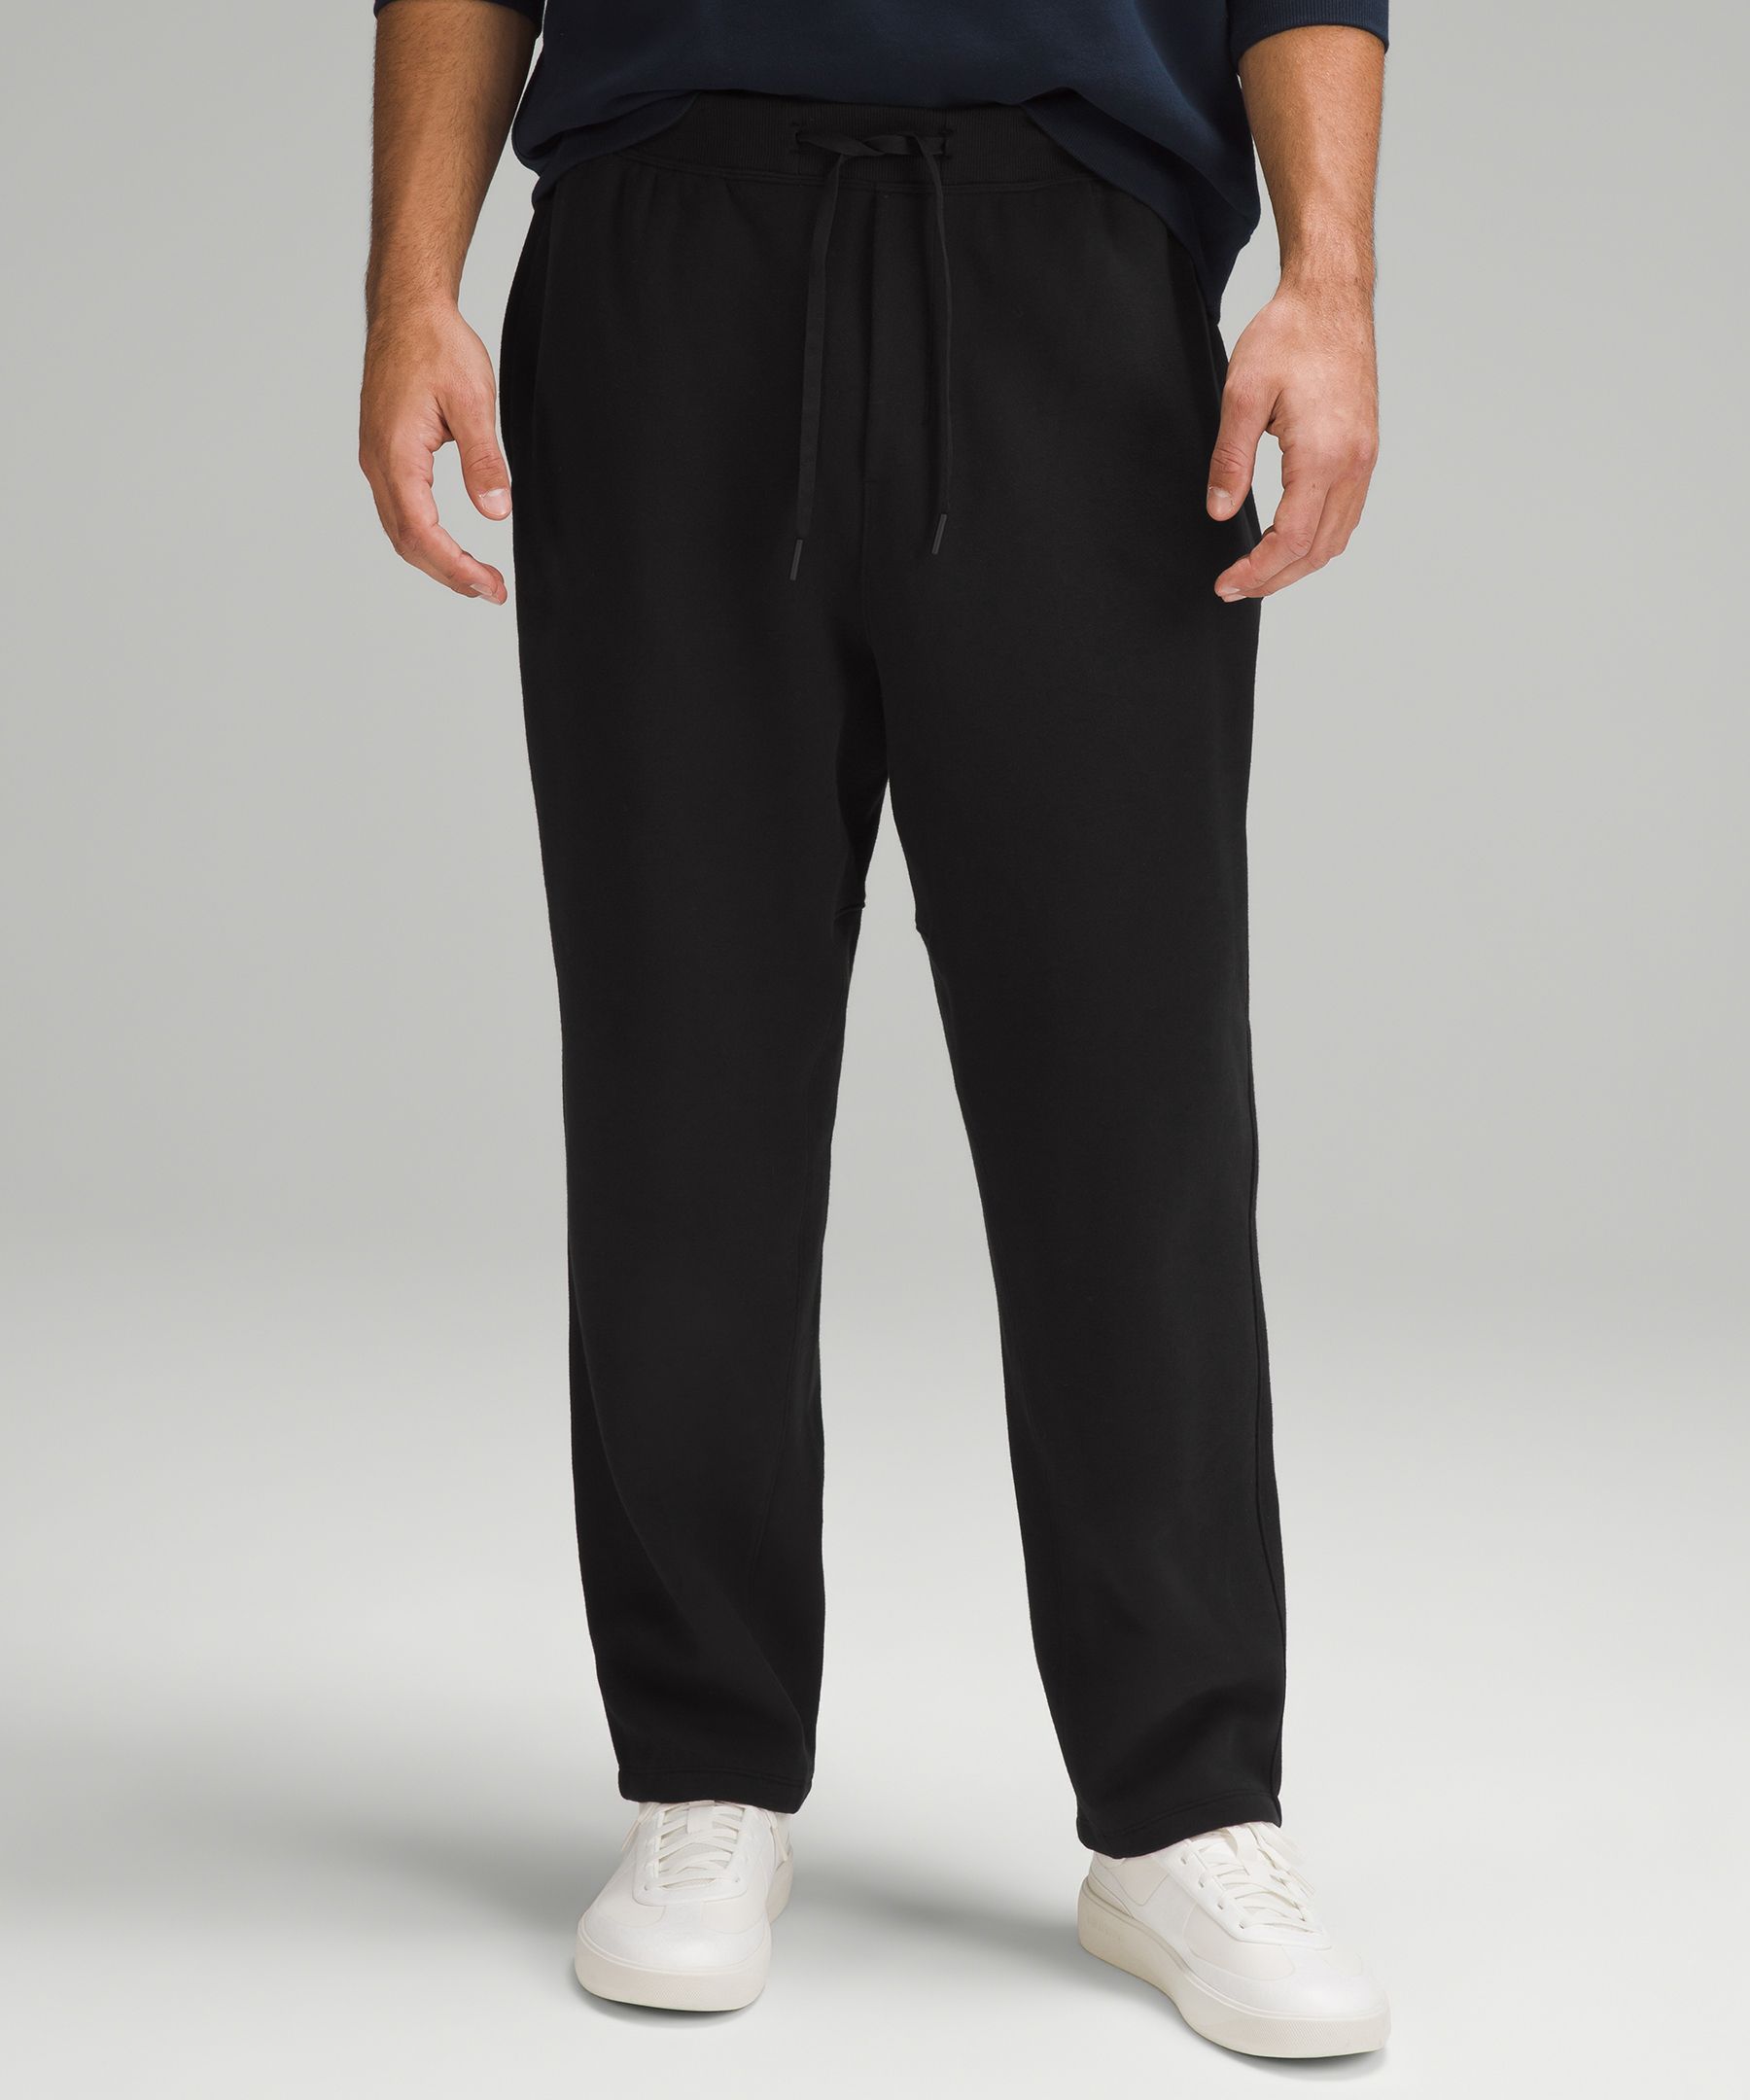 Steady State Pant *Tall